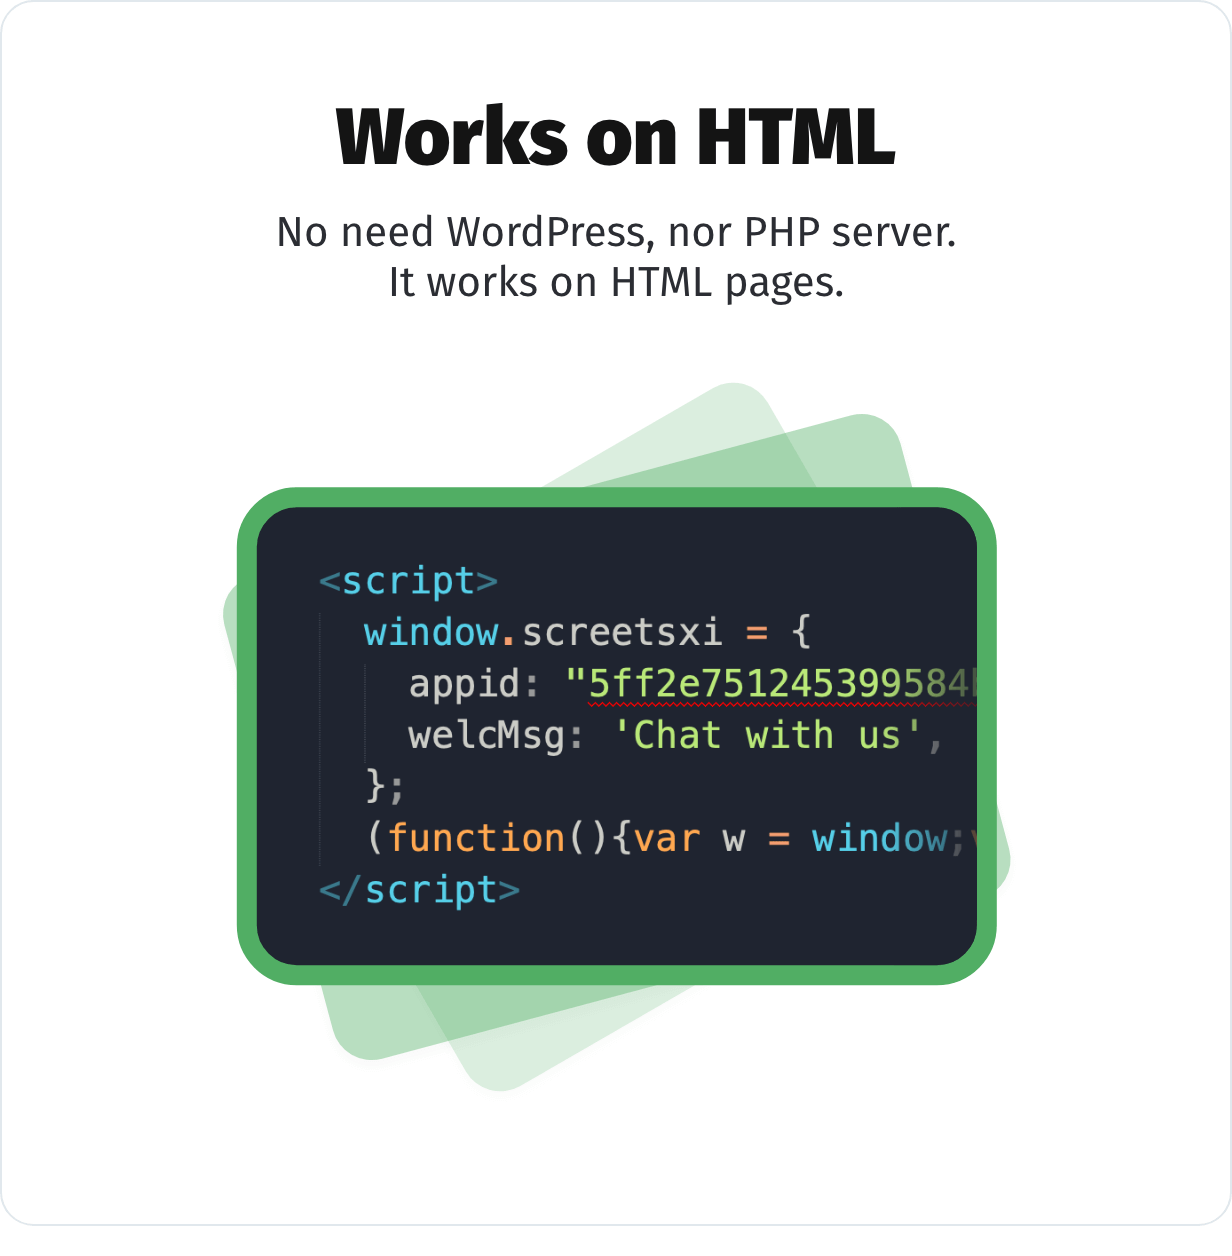 Works on HTML